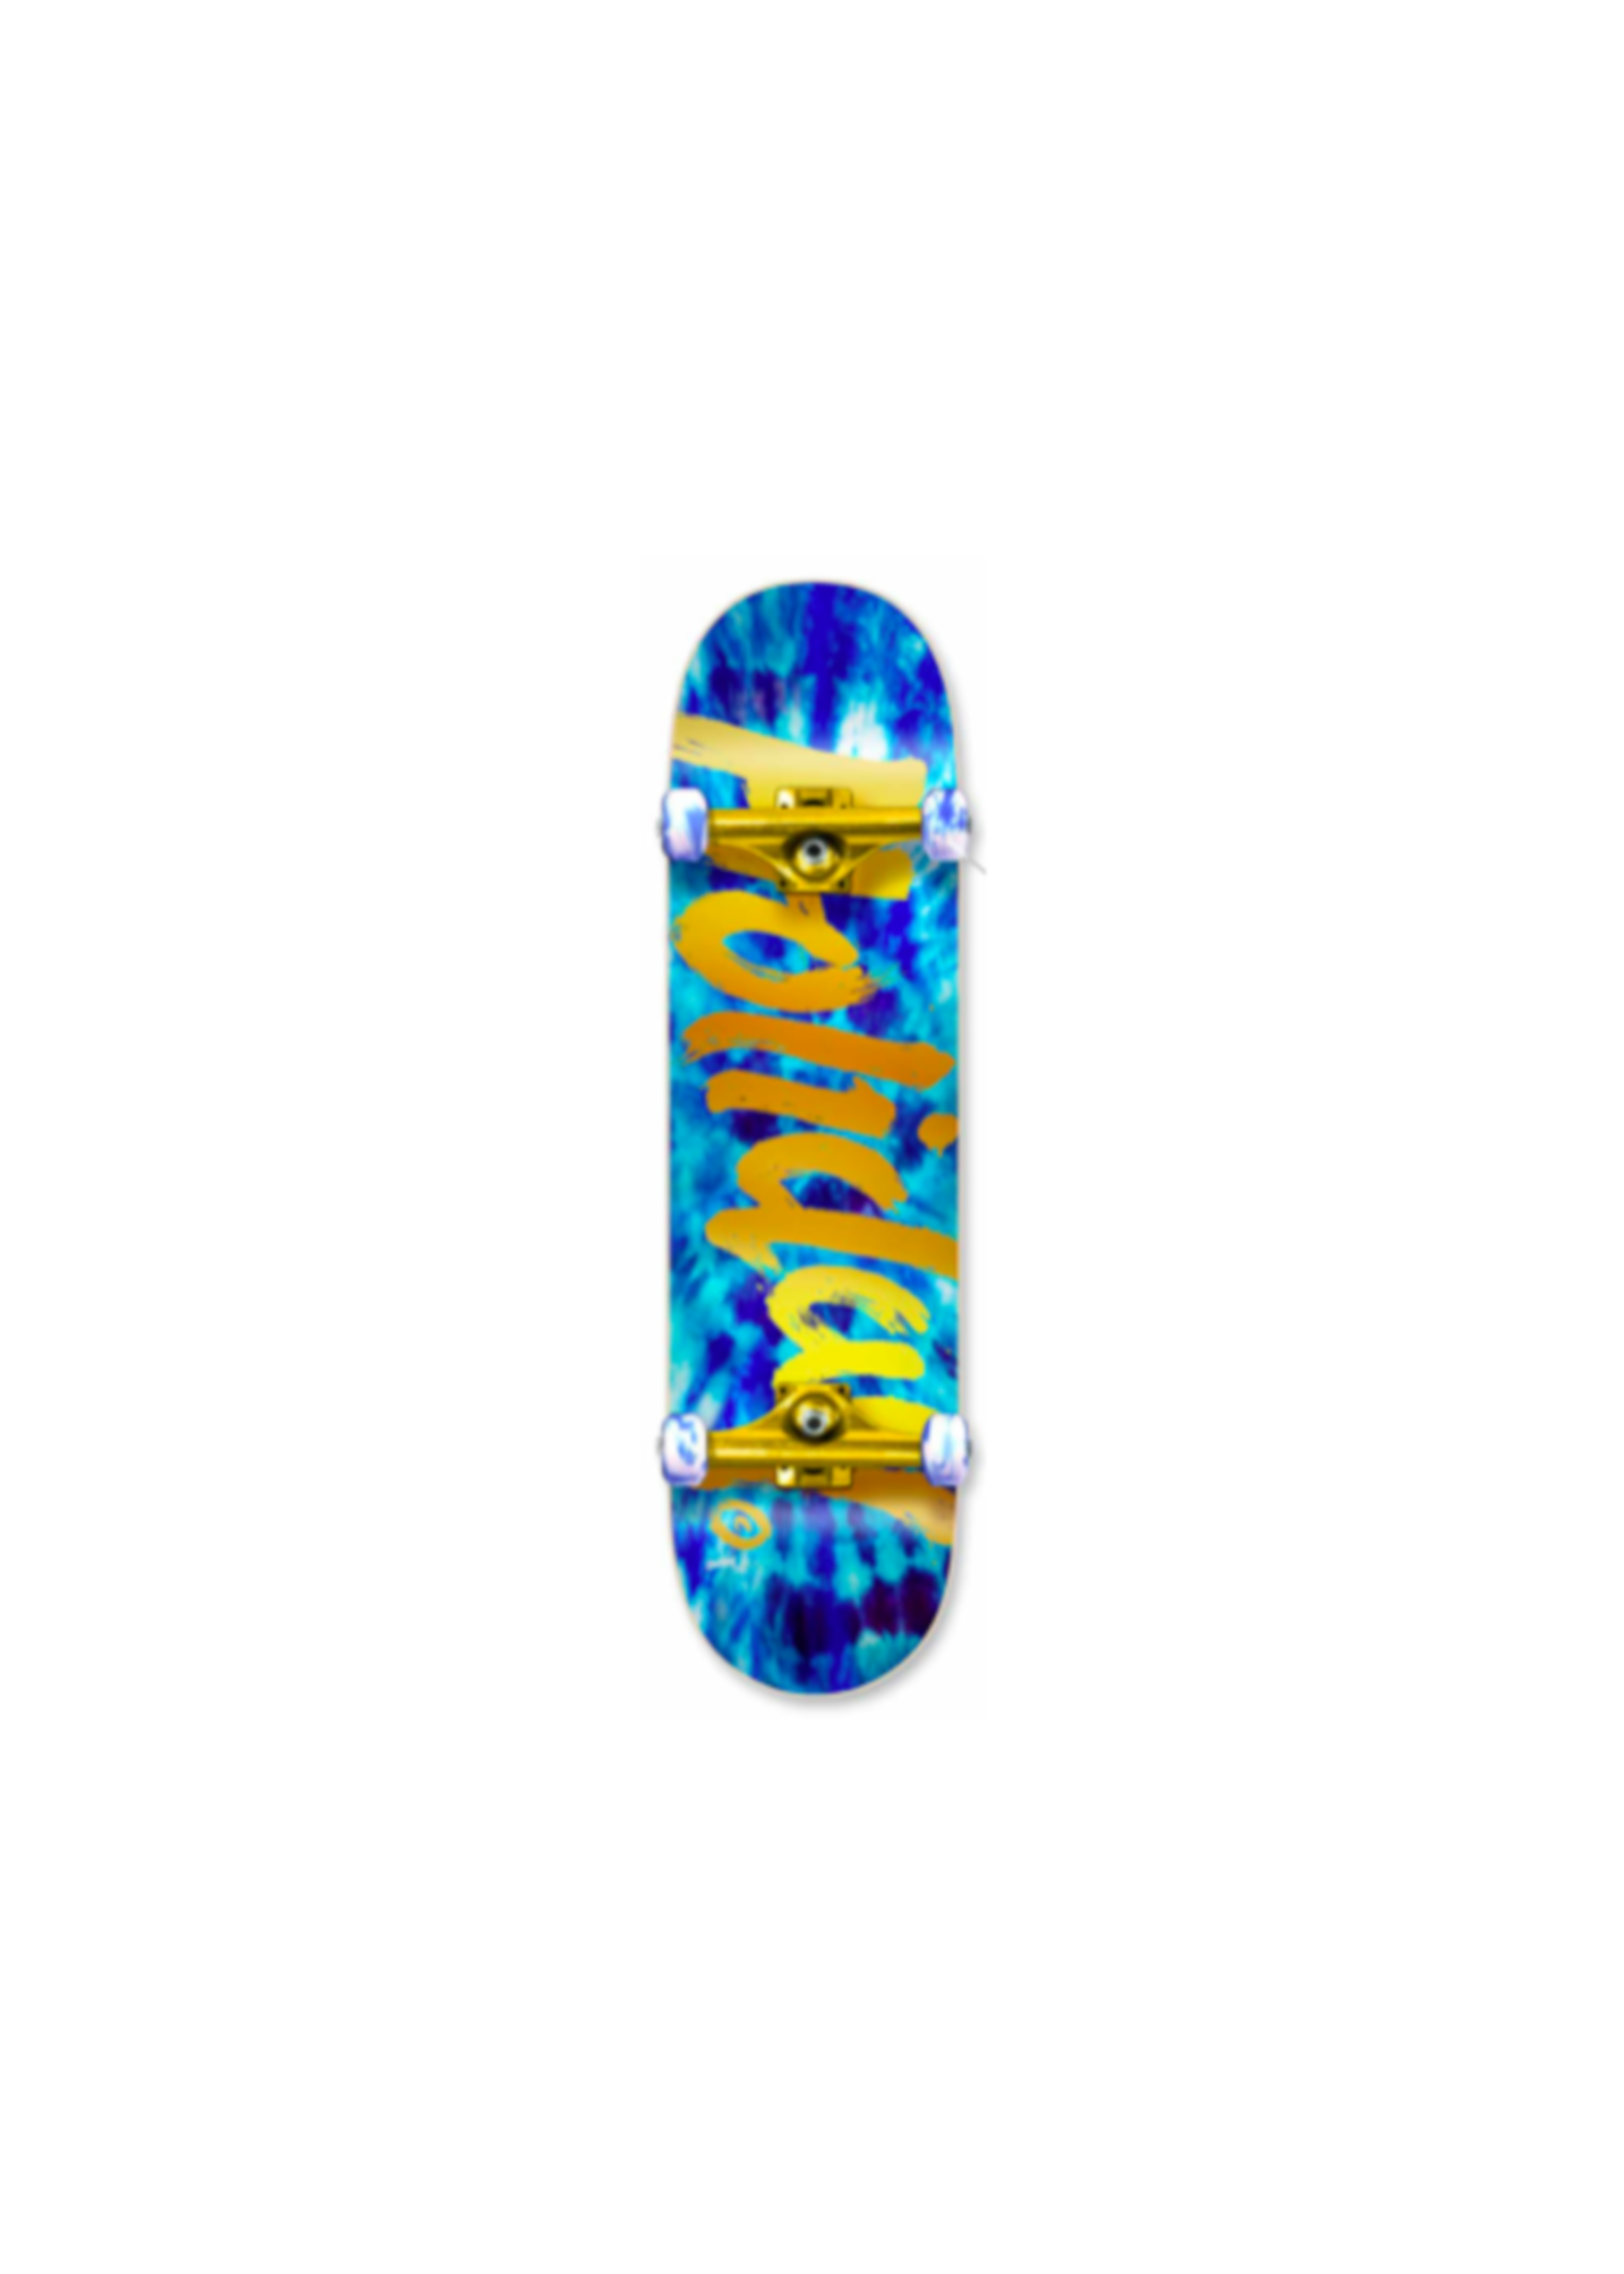 Holiday Skateboards Holiday Skateboards - Tie Dye Ice/Gold Complete 8.0